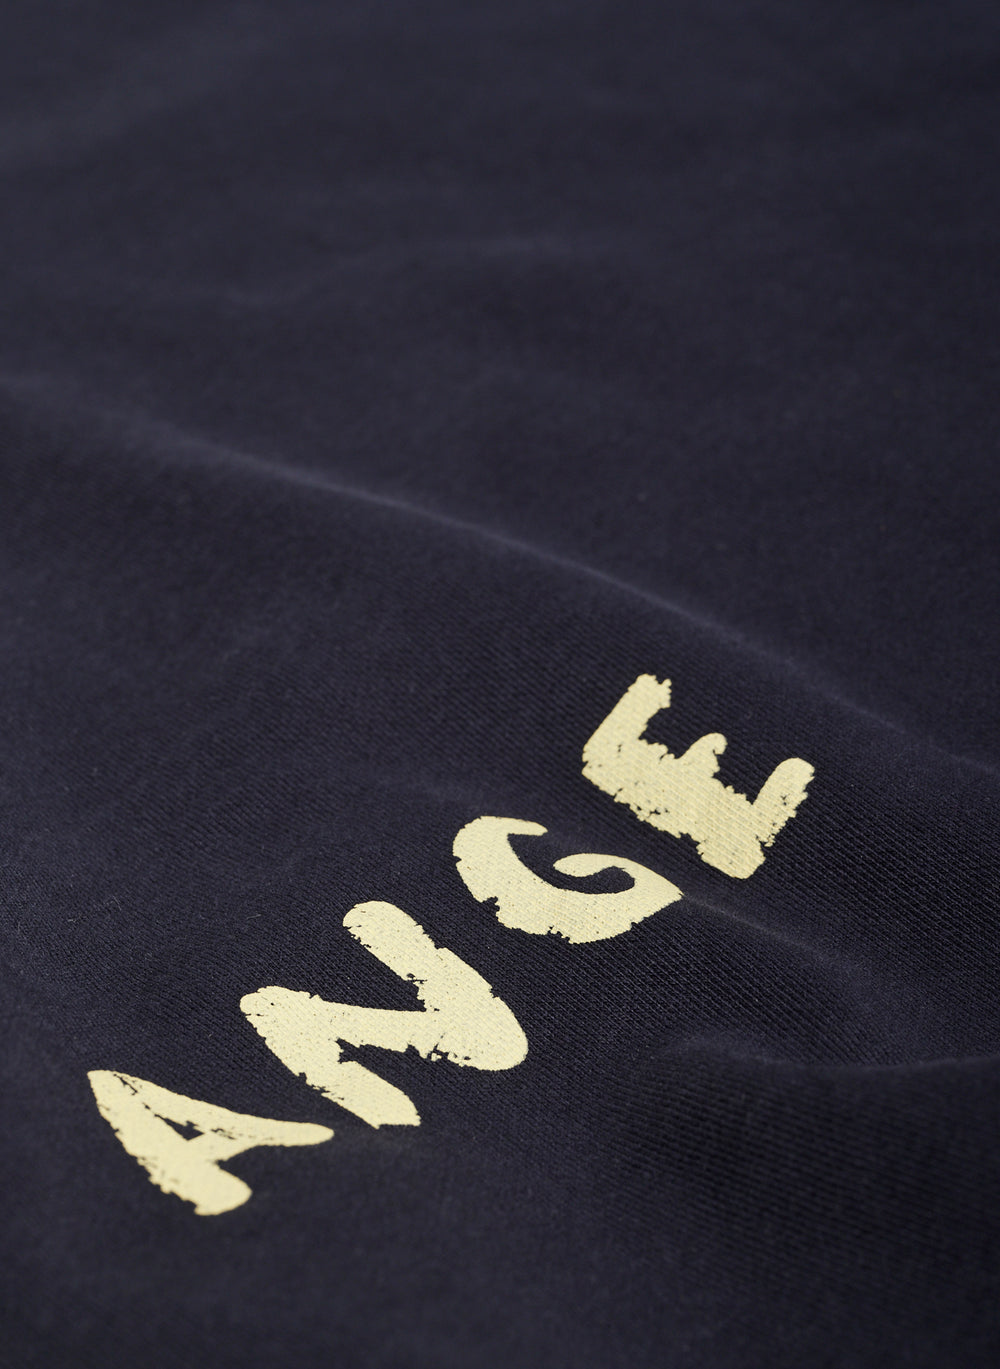 ANGE PROJECTS MOUNTAIN CREWNECK